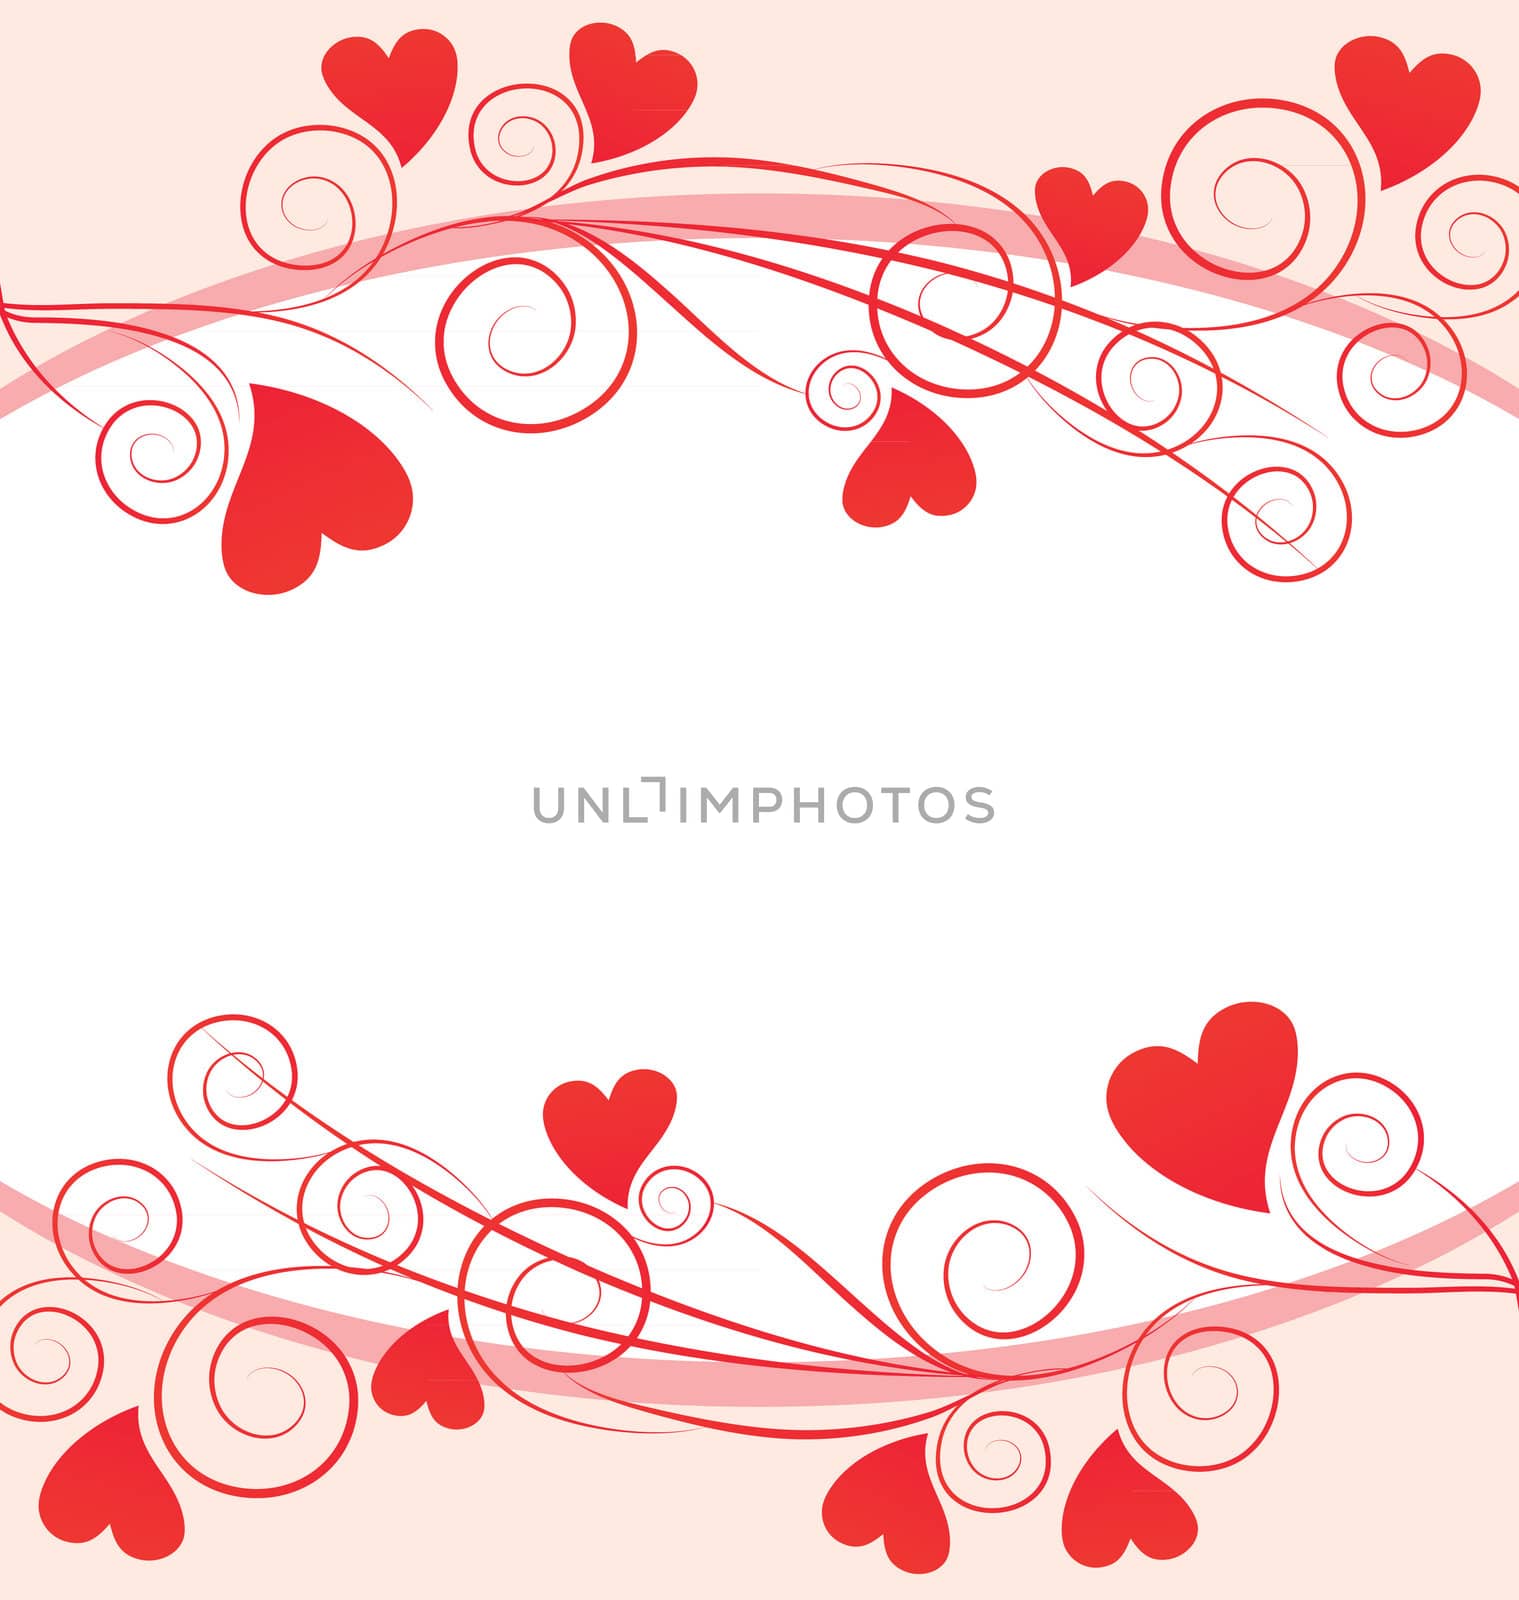 vector red hearts grafic frame on white background